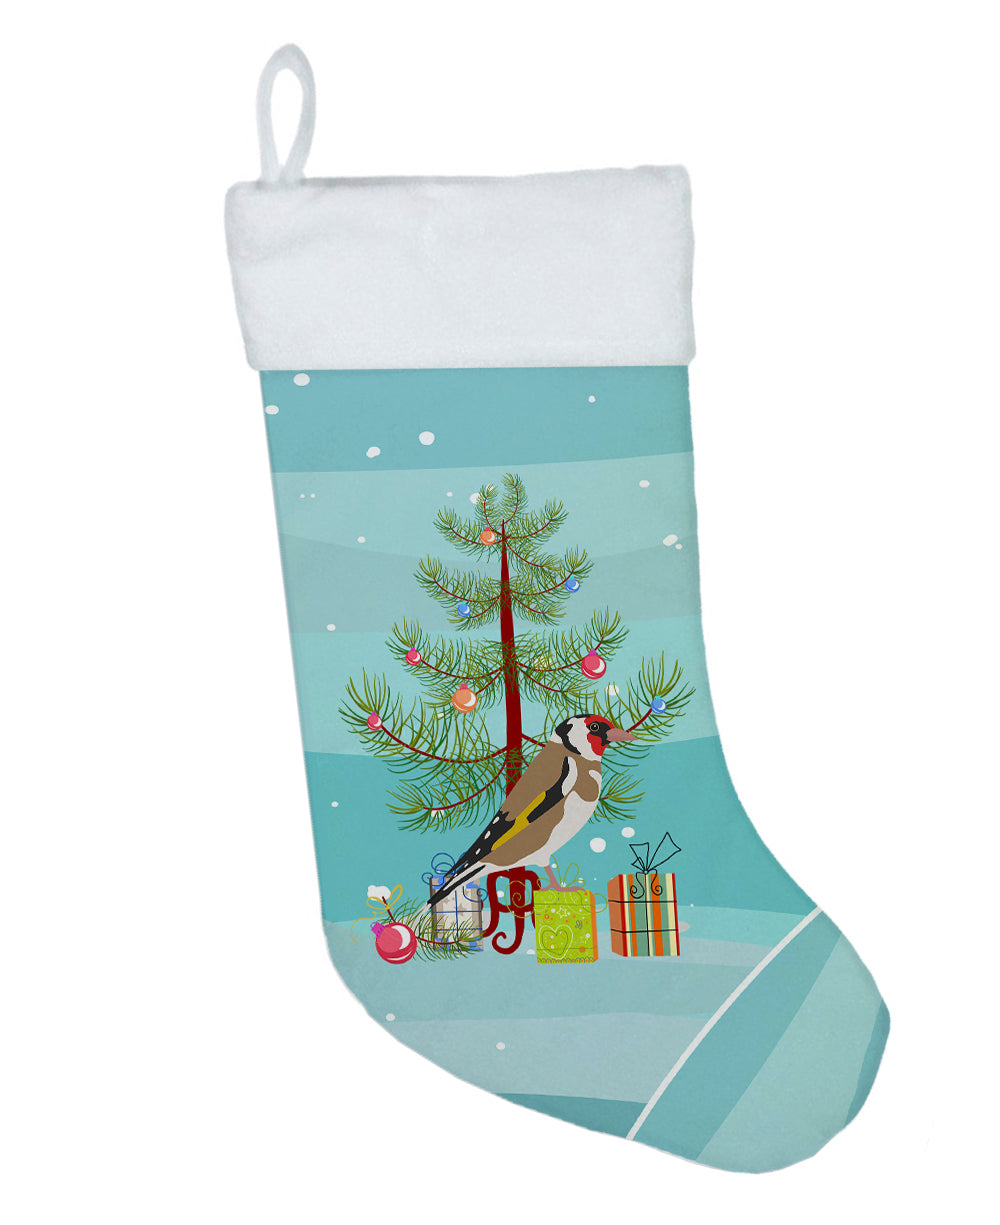 Gold Finch Merry Christmas Christmas Stocking